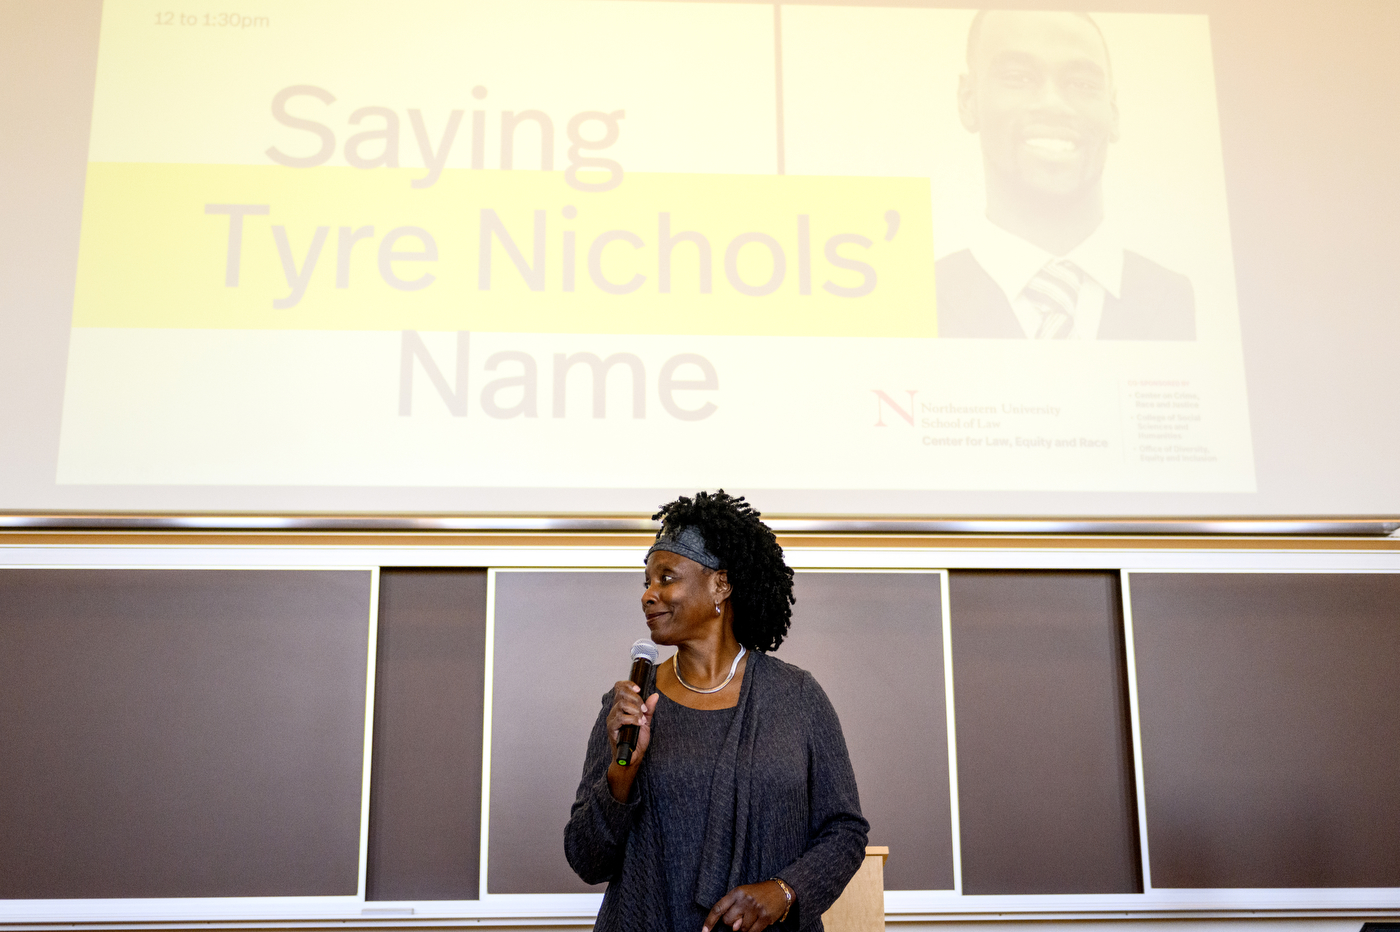 person holding microphone in front of powerpoint display sbout tyre nichols